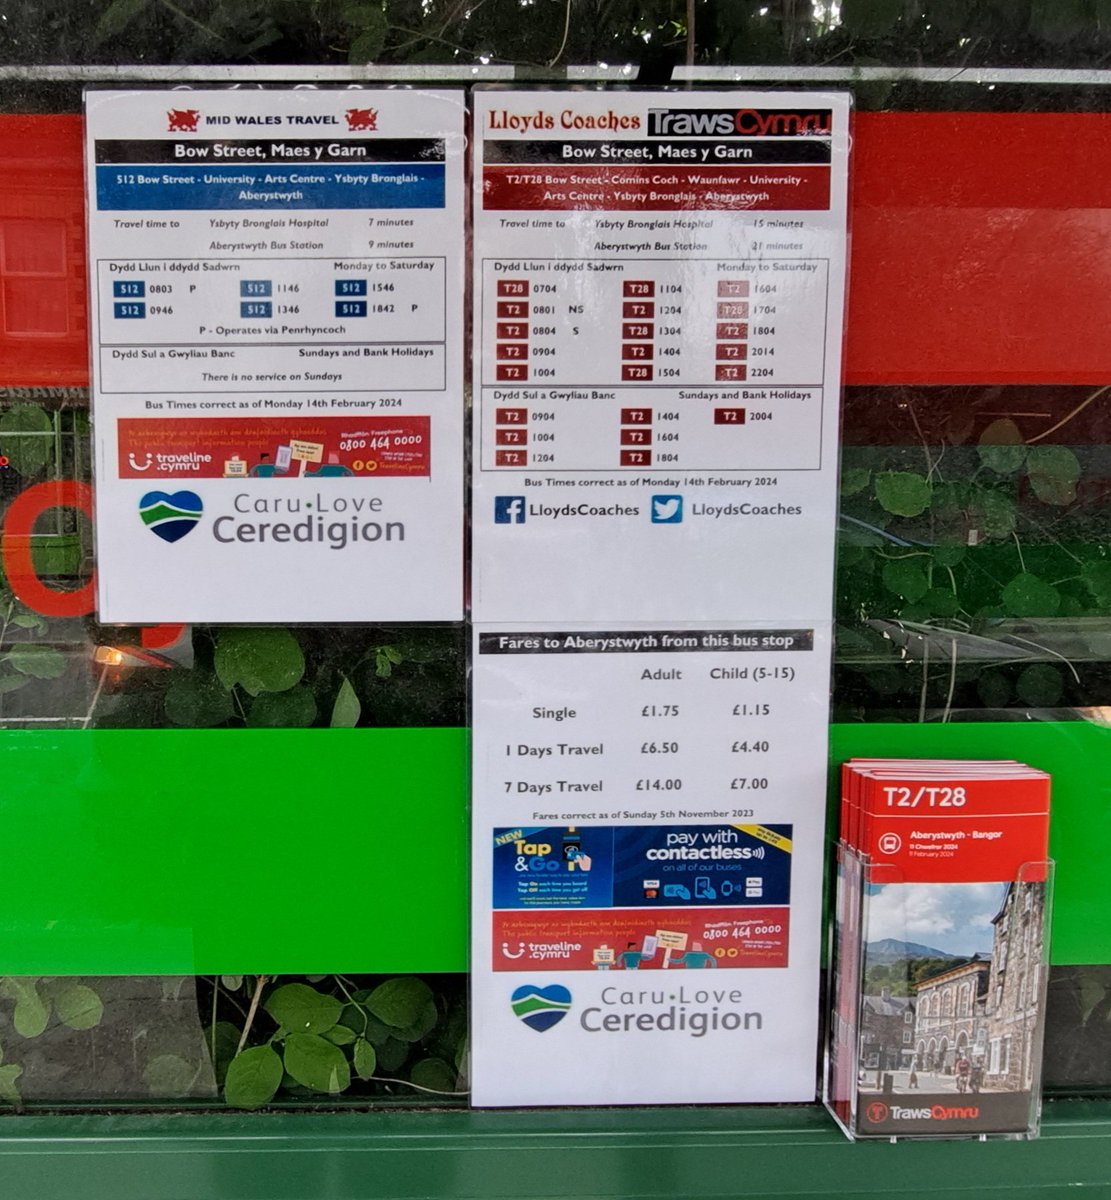 We know that info at some stops has been neglected since Covid. Over the next few weeks, we'll concentrate updating stops across our network to provide up to date information, where possible, including that of other operators to give you the best options for your journey.